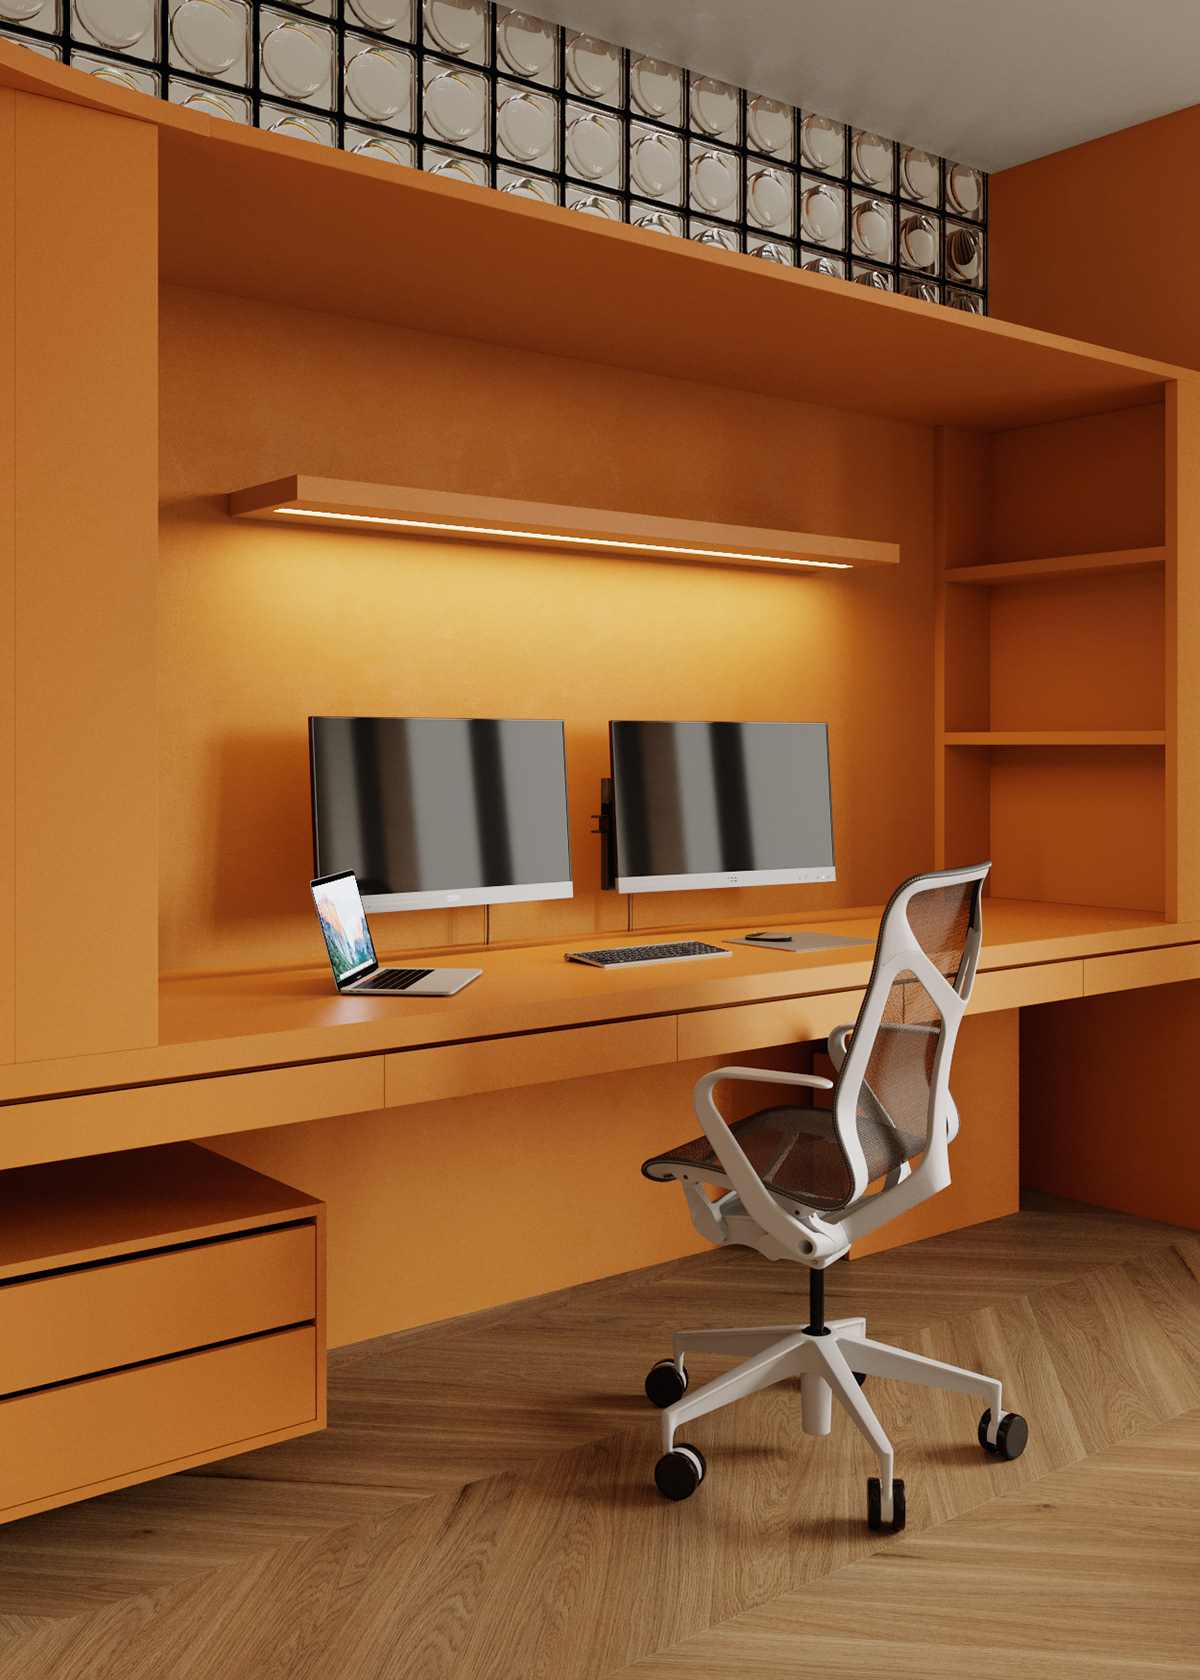 To avoid being absorbed into this completely open space, the workspace has a striking orange tone.